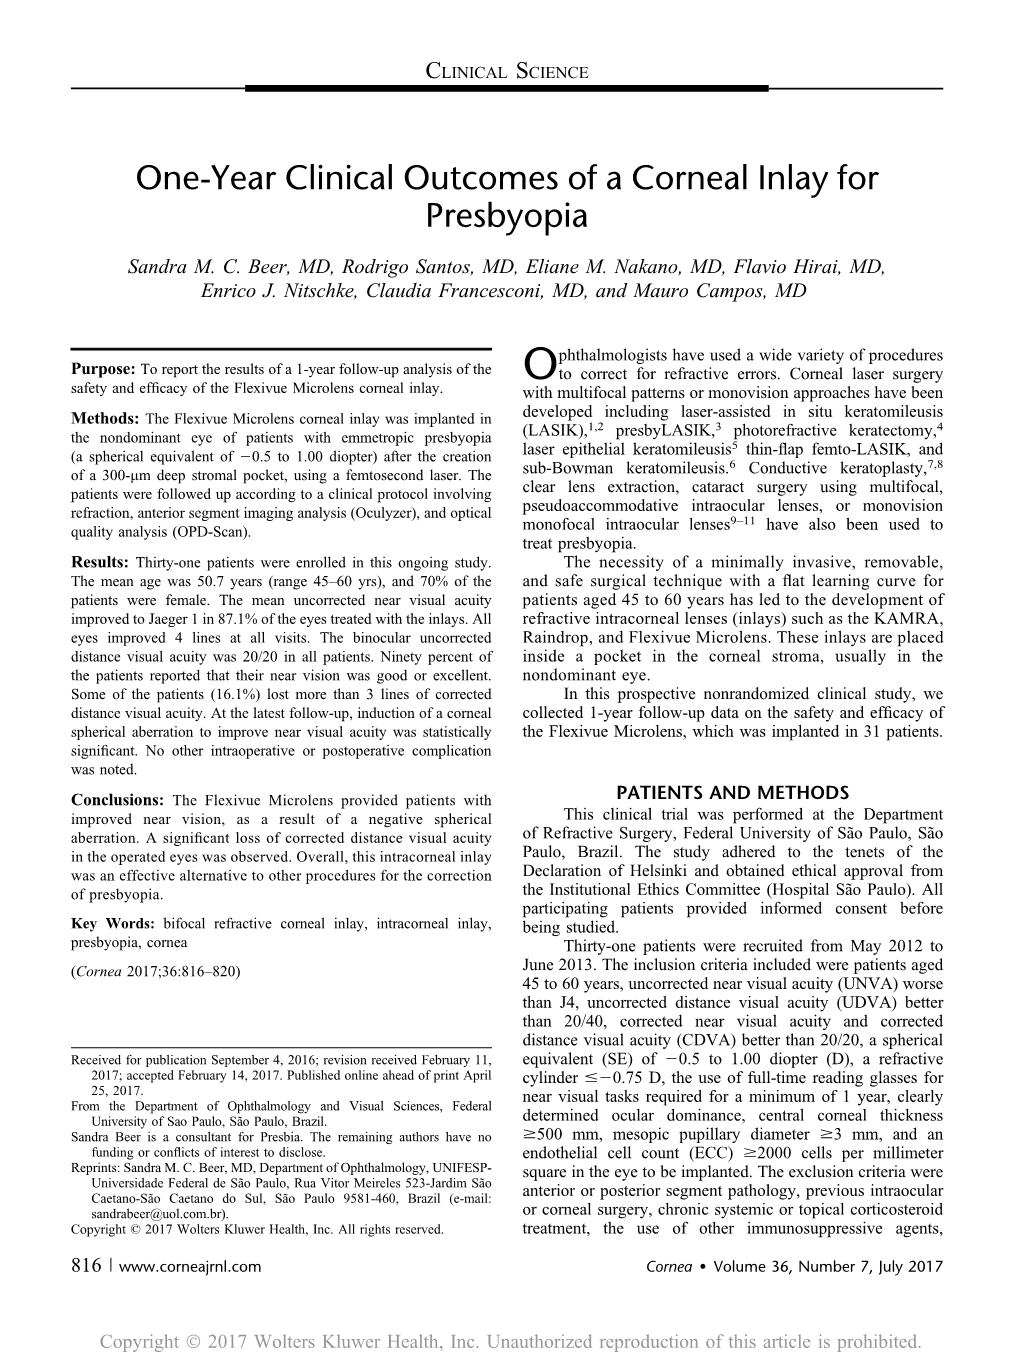 One-Year Clinical Outcomes of a Corneal Inlay for Presbyopia